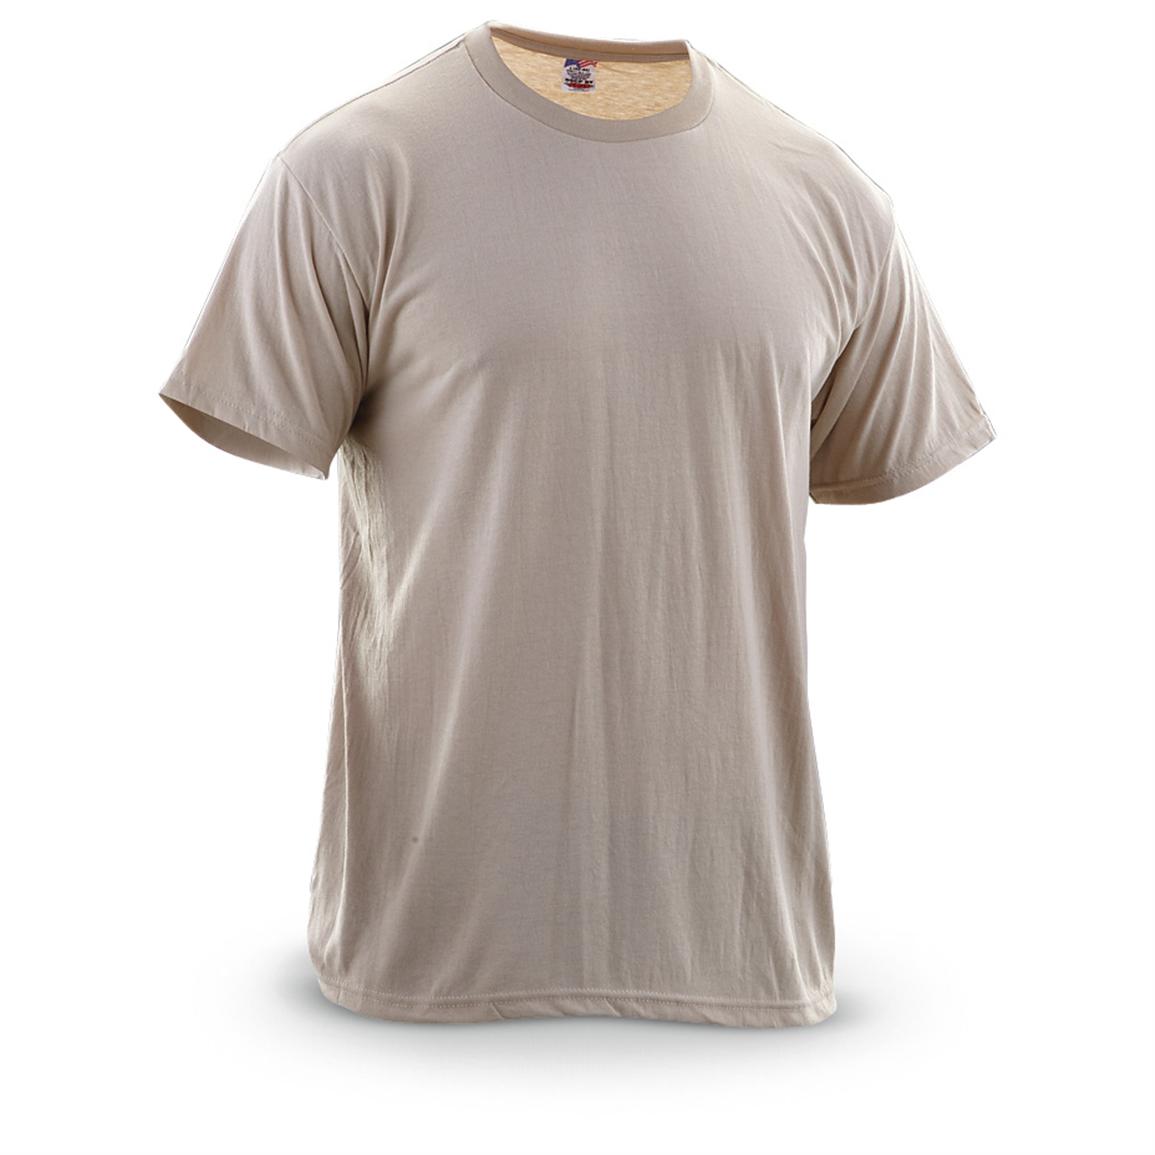 5 Military - issue T - shirts, Tan - 215514, Military T-Shirts at Sportsman's Guide